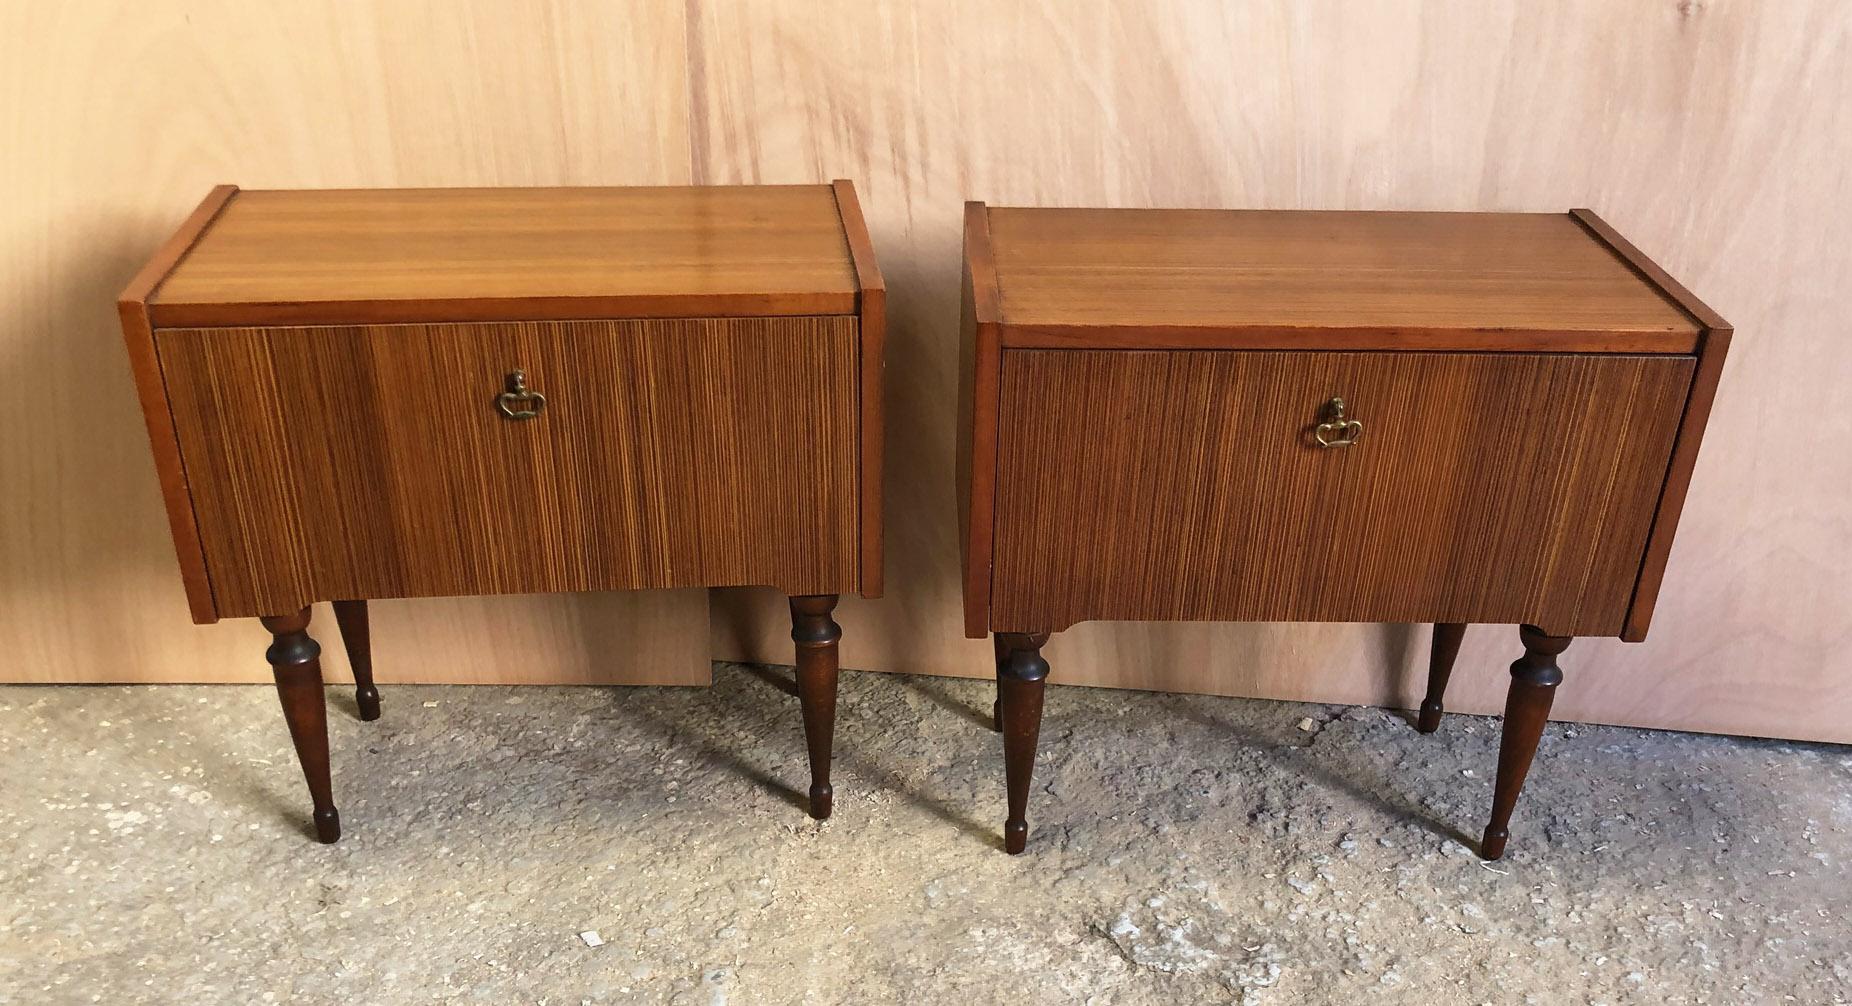 Pair of bedside tables from 1970, Italian, veneered in teak on chipboard. 
Particular opening of the doors. Honey color.
Comes from an old  rich country house in the Florence area of Tuscany.
As shown in the photographs and videos, there are no